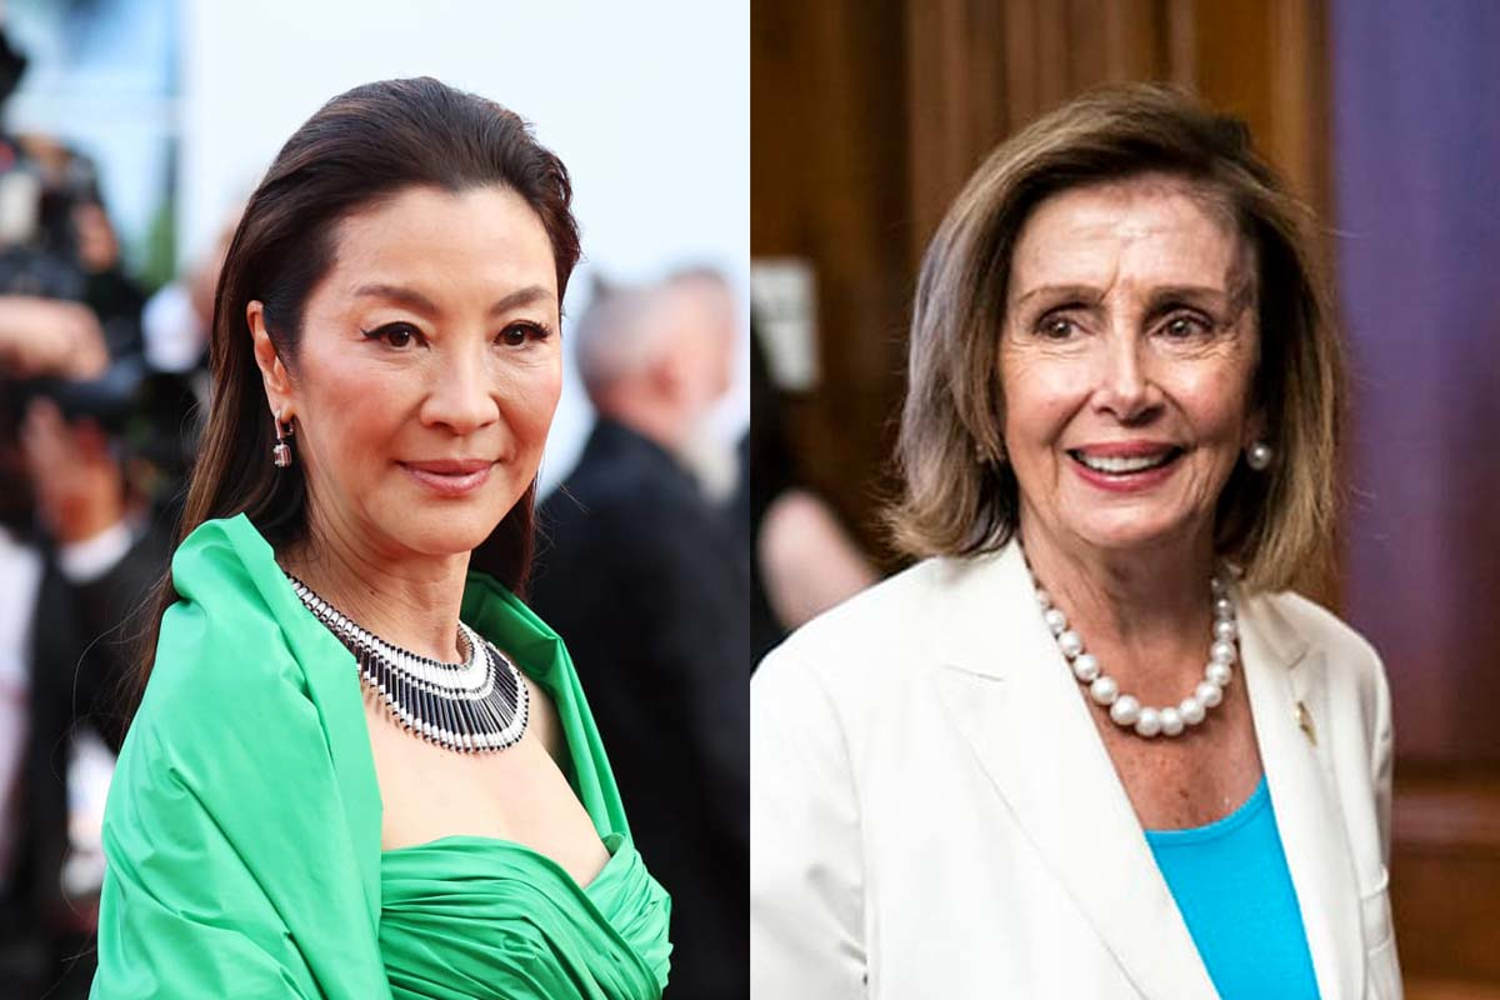 Biden to award Presidential Medal of Freedom to recipients including Nancy Pelosi and Michelle Yeoh